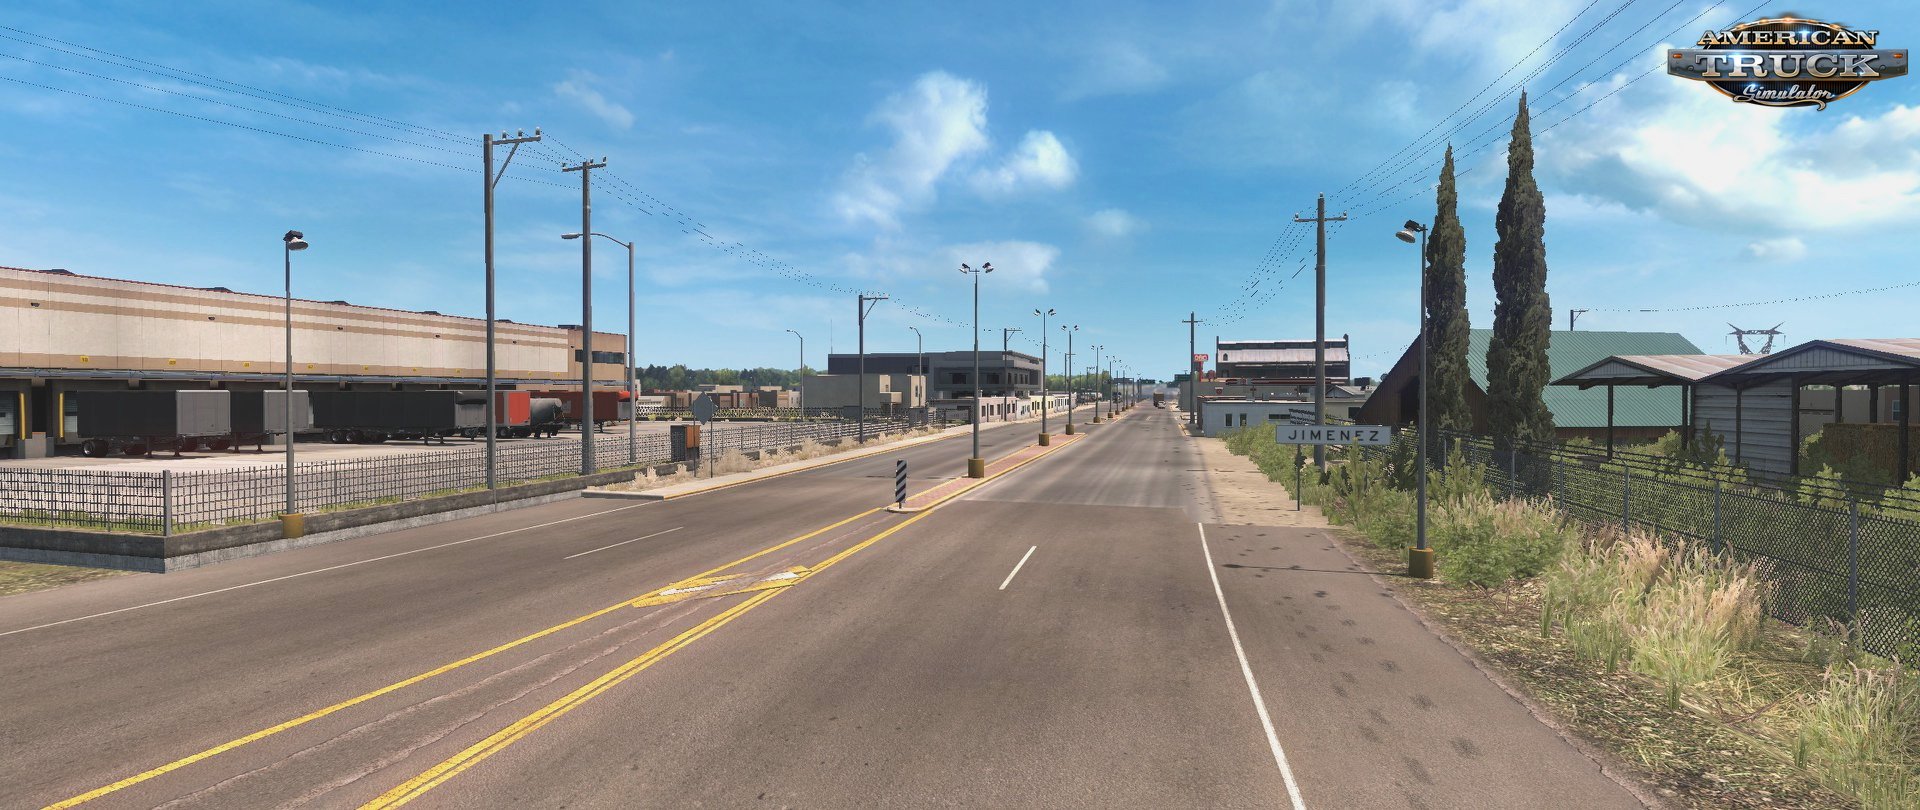 Mexico Extremo Map v2.1.9 (1.35.x) for ATS